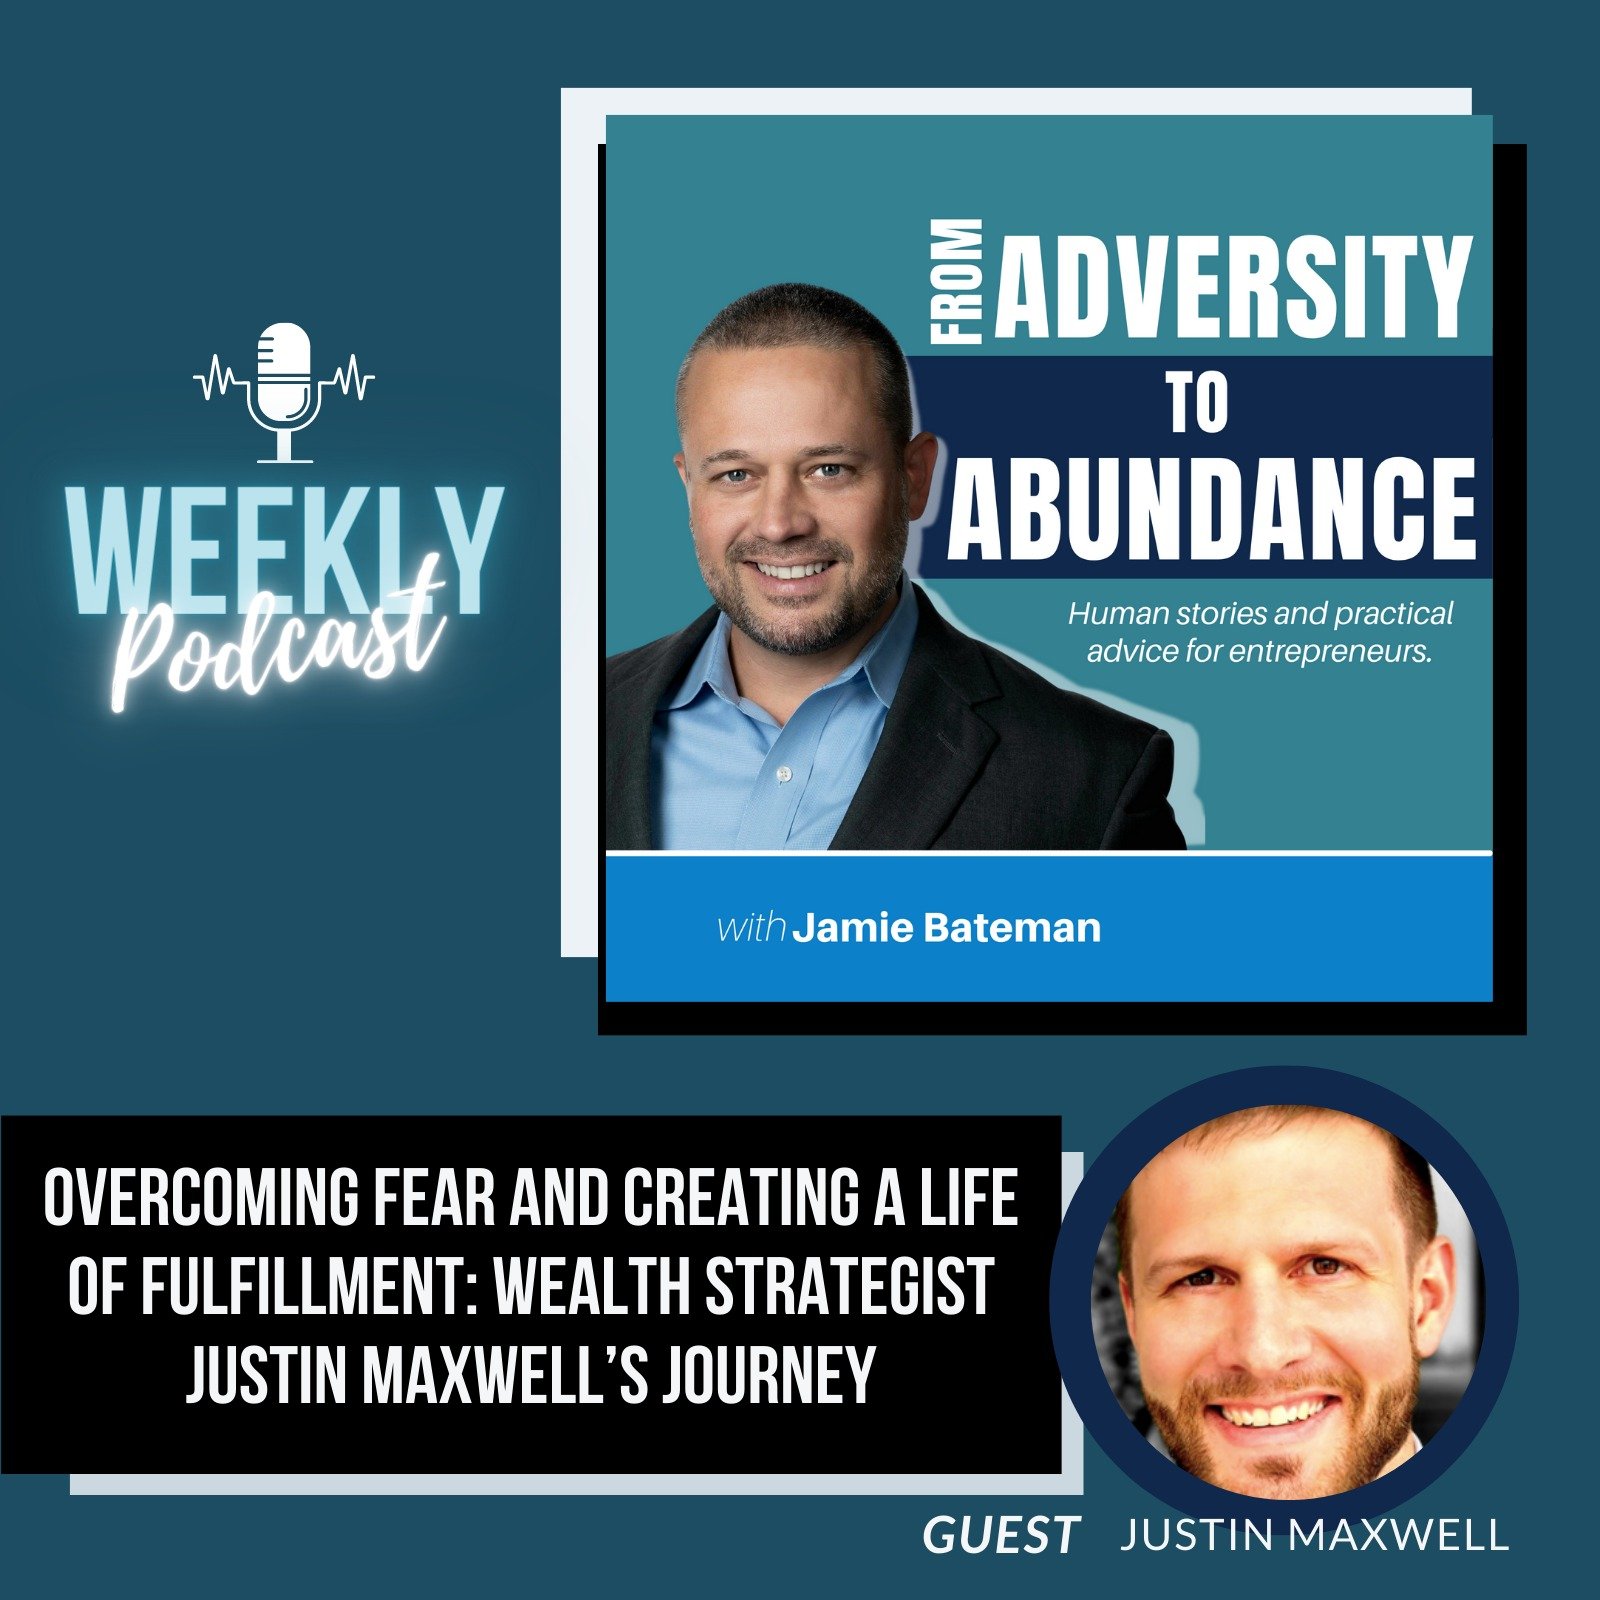 Overcoming Fear and Creating a Life of Fulfillment: Wealth Strategist Justin Maxwell’s Journey